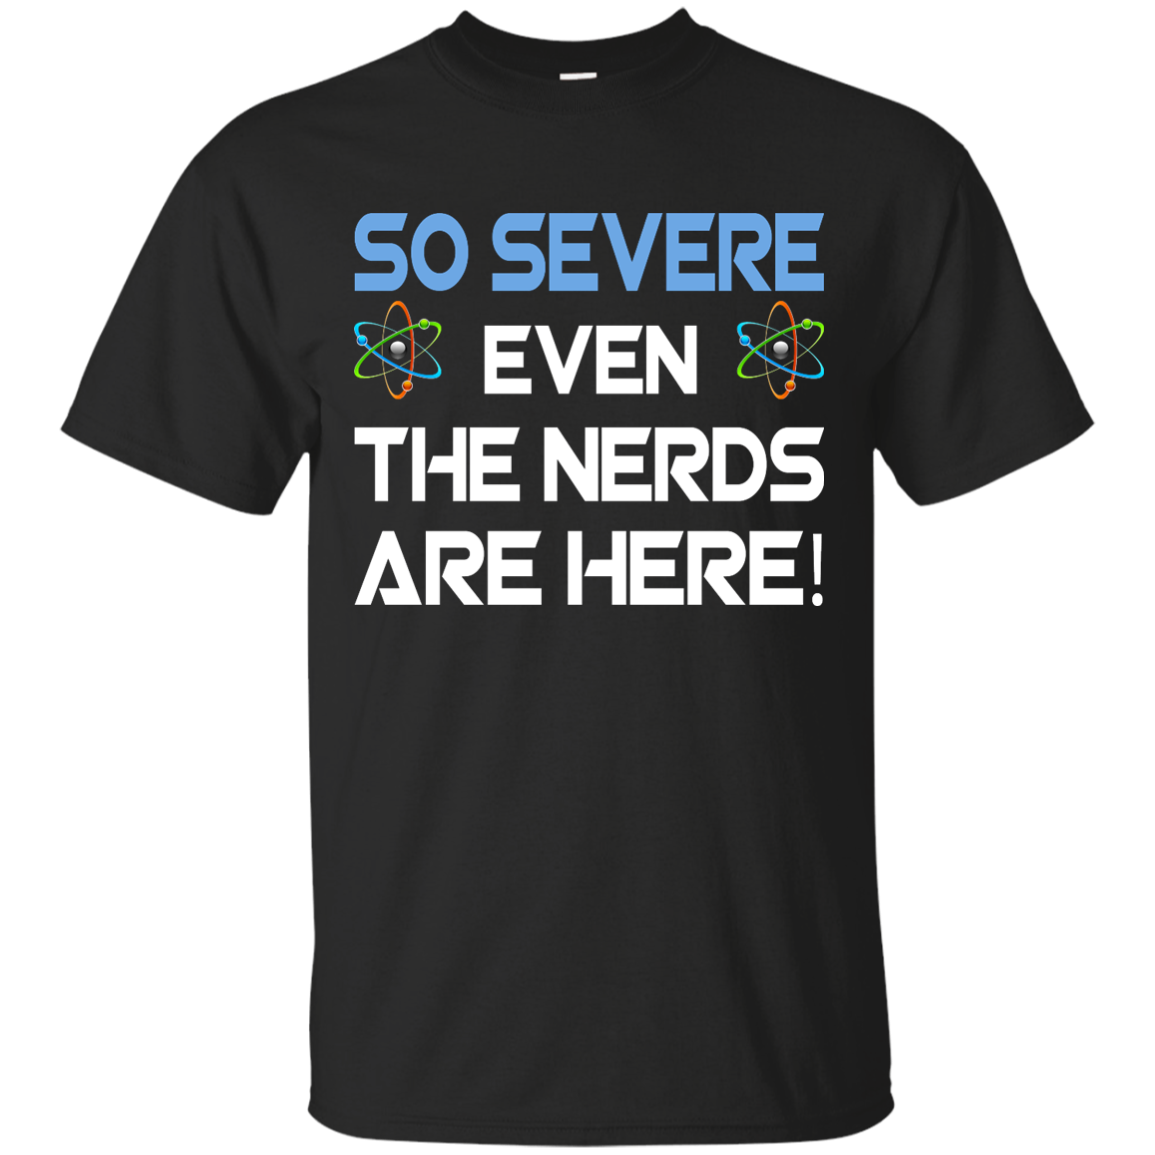 So Severe Even The Nerds Are Here shirt, tank - Science March